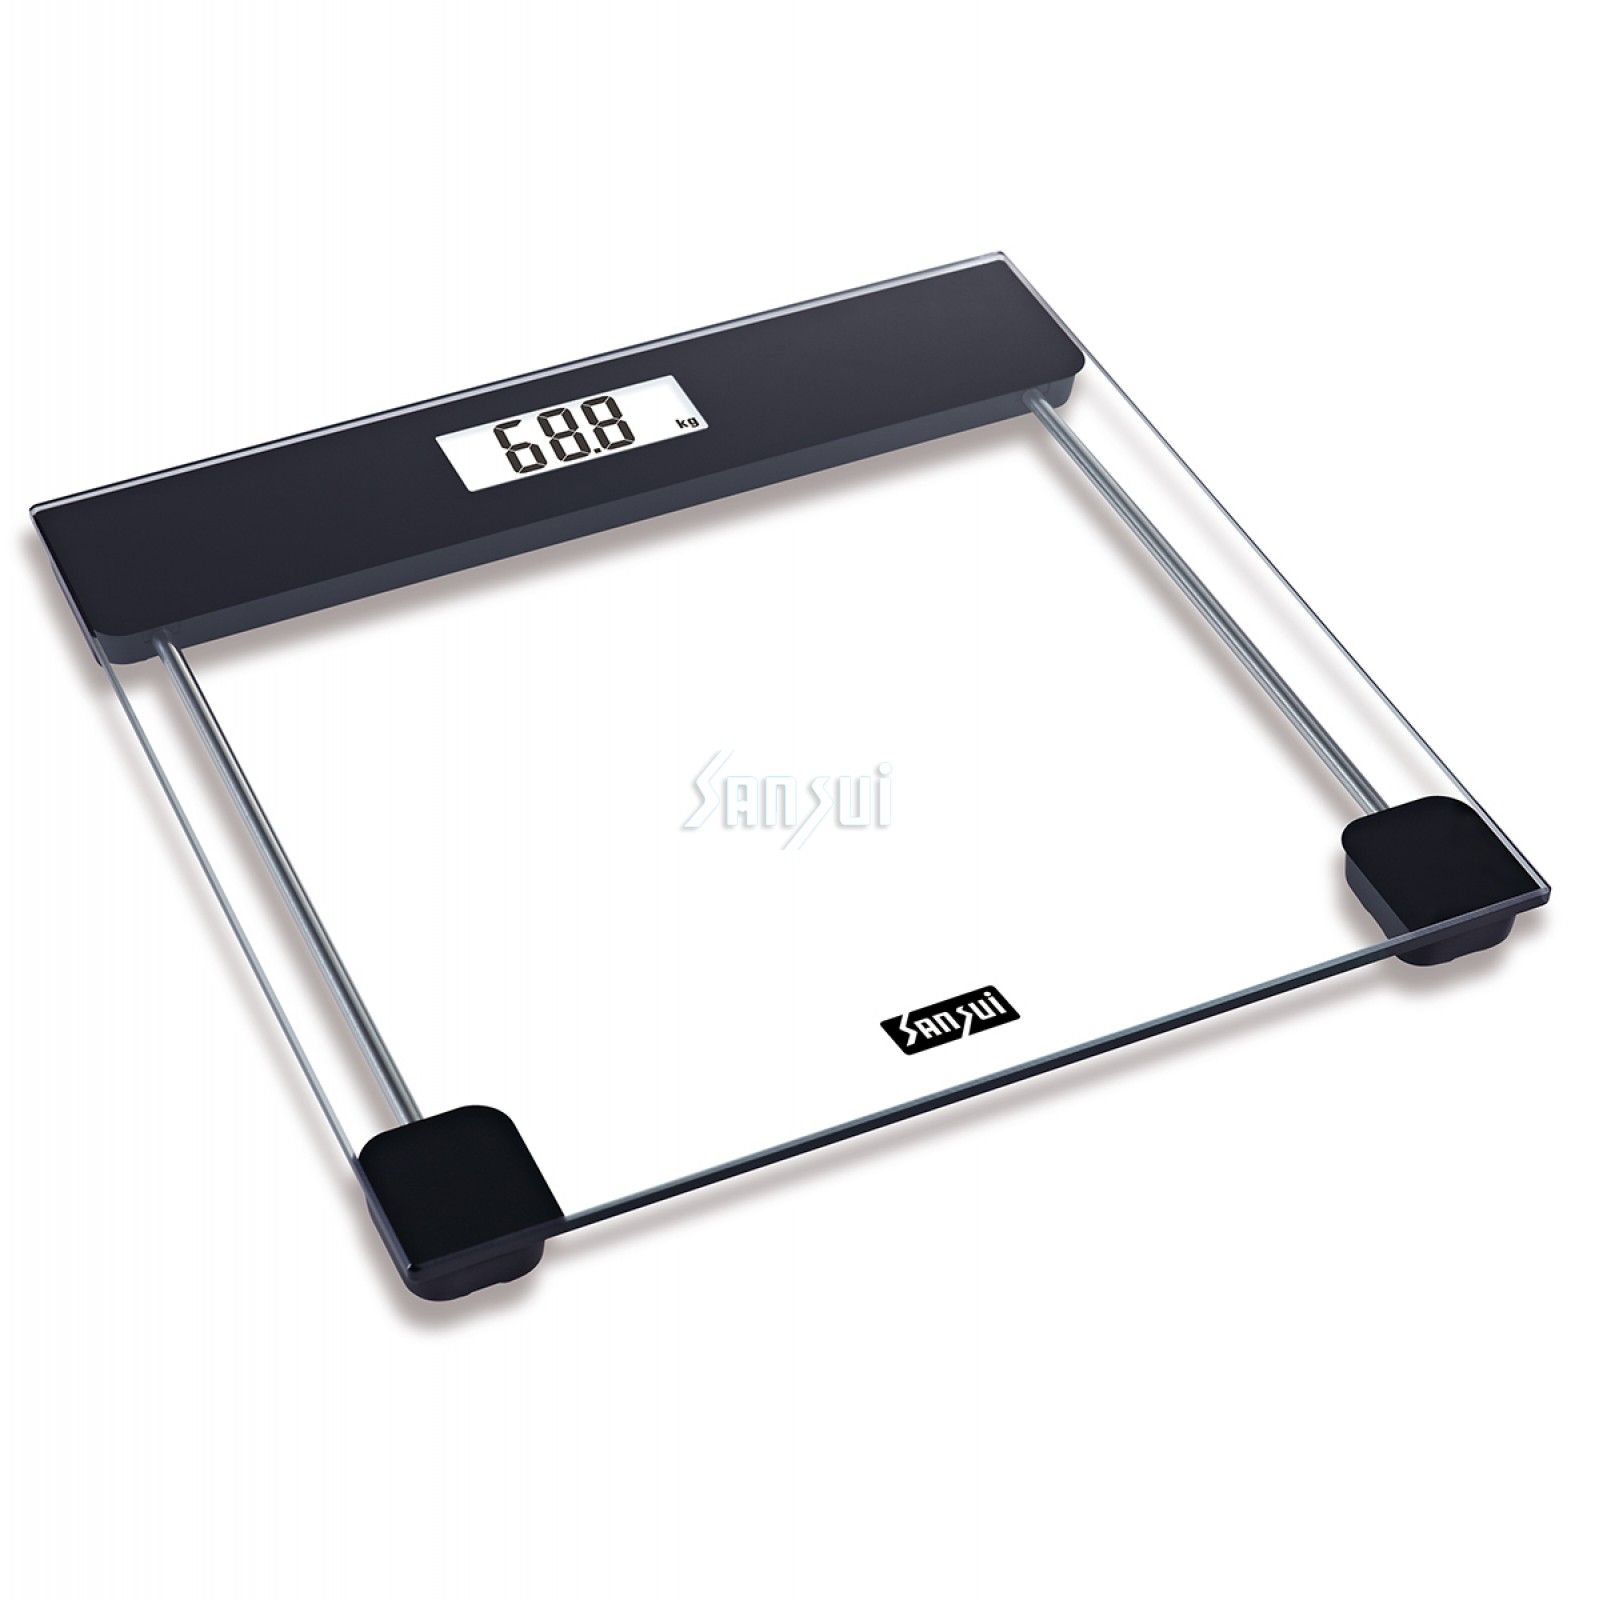  Sansui Personal Weighing Scale, Bathroom Weight Machine with Backlight LCD Display (180 kg, Transparent)